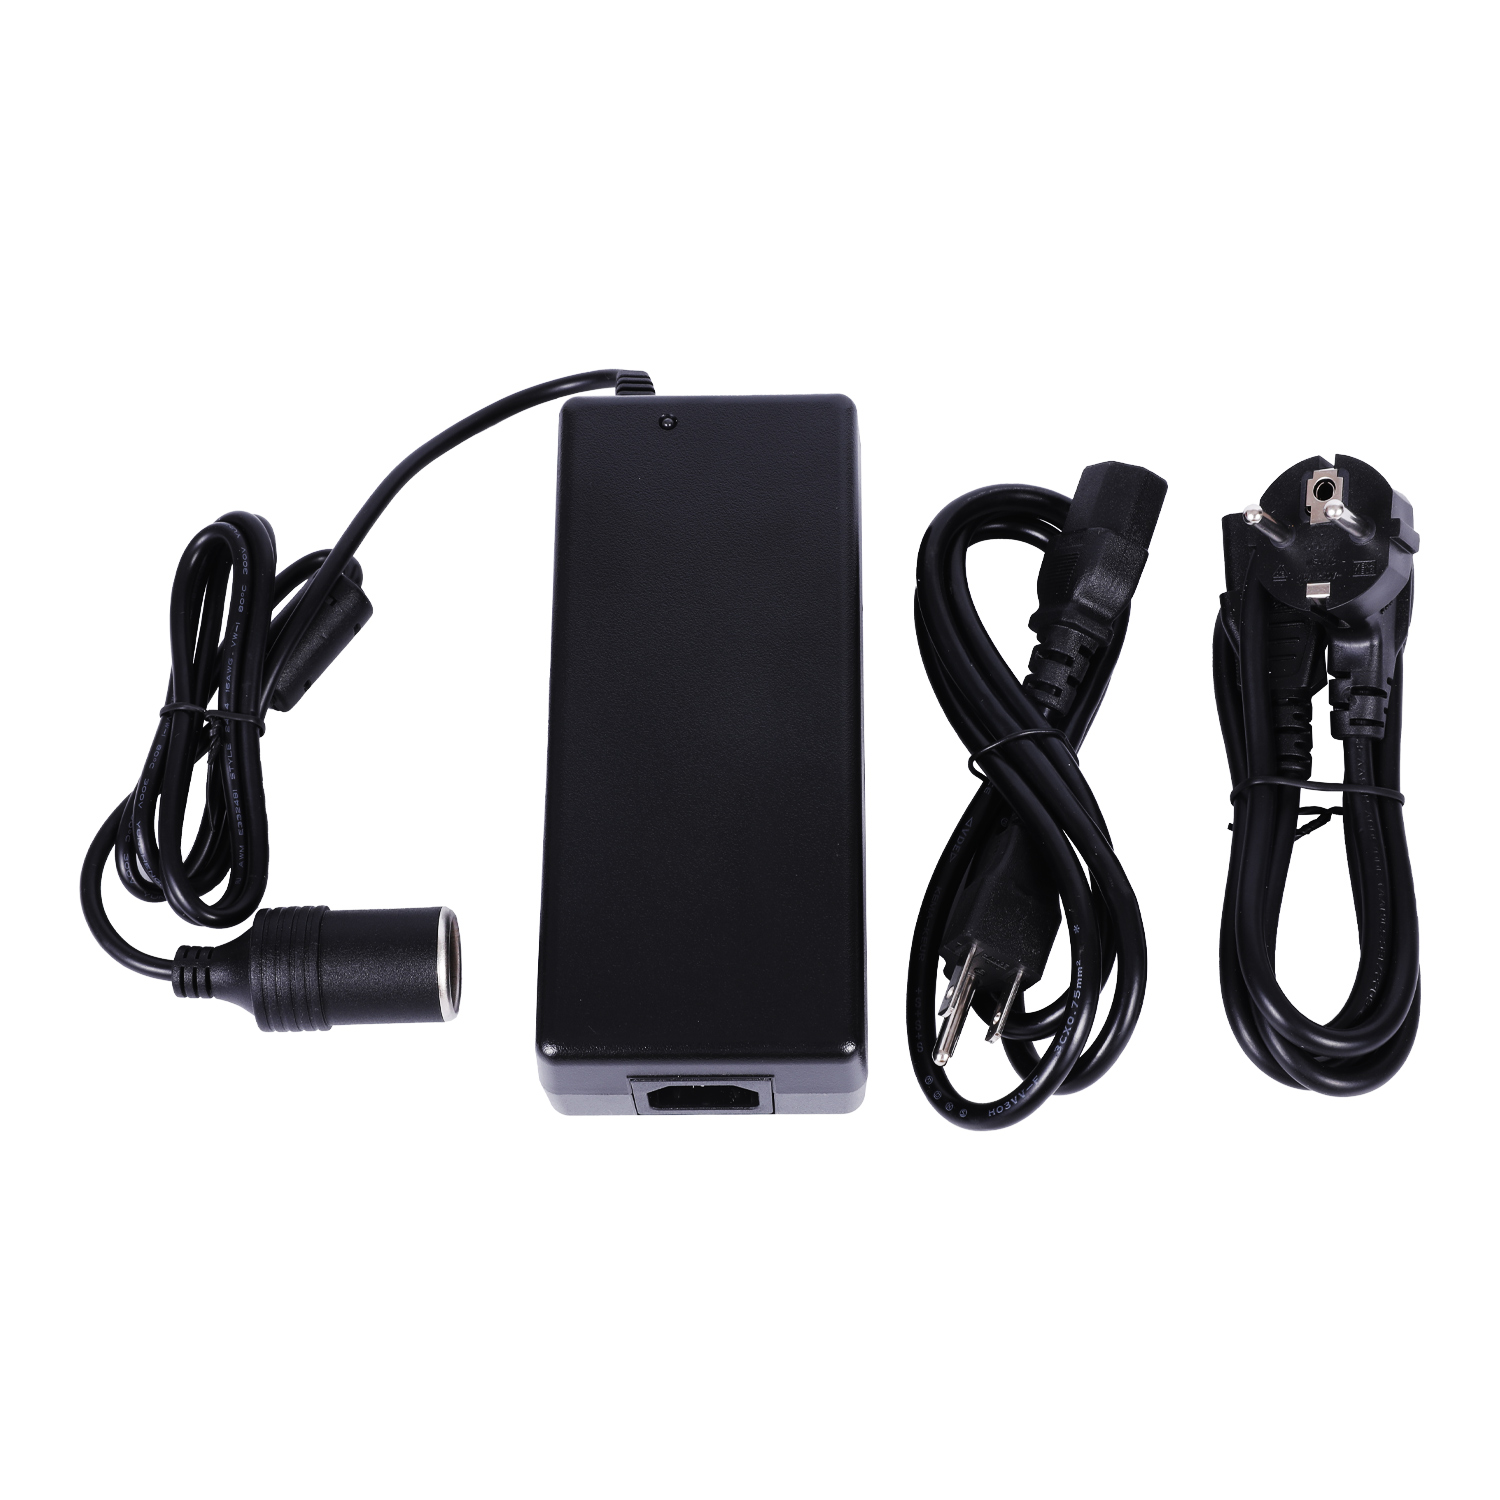 Indoor adaptor 50-60hz 24V 2.5A 60W notebook ac adapter for print-copy